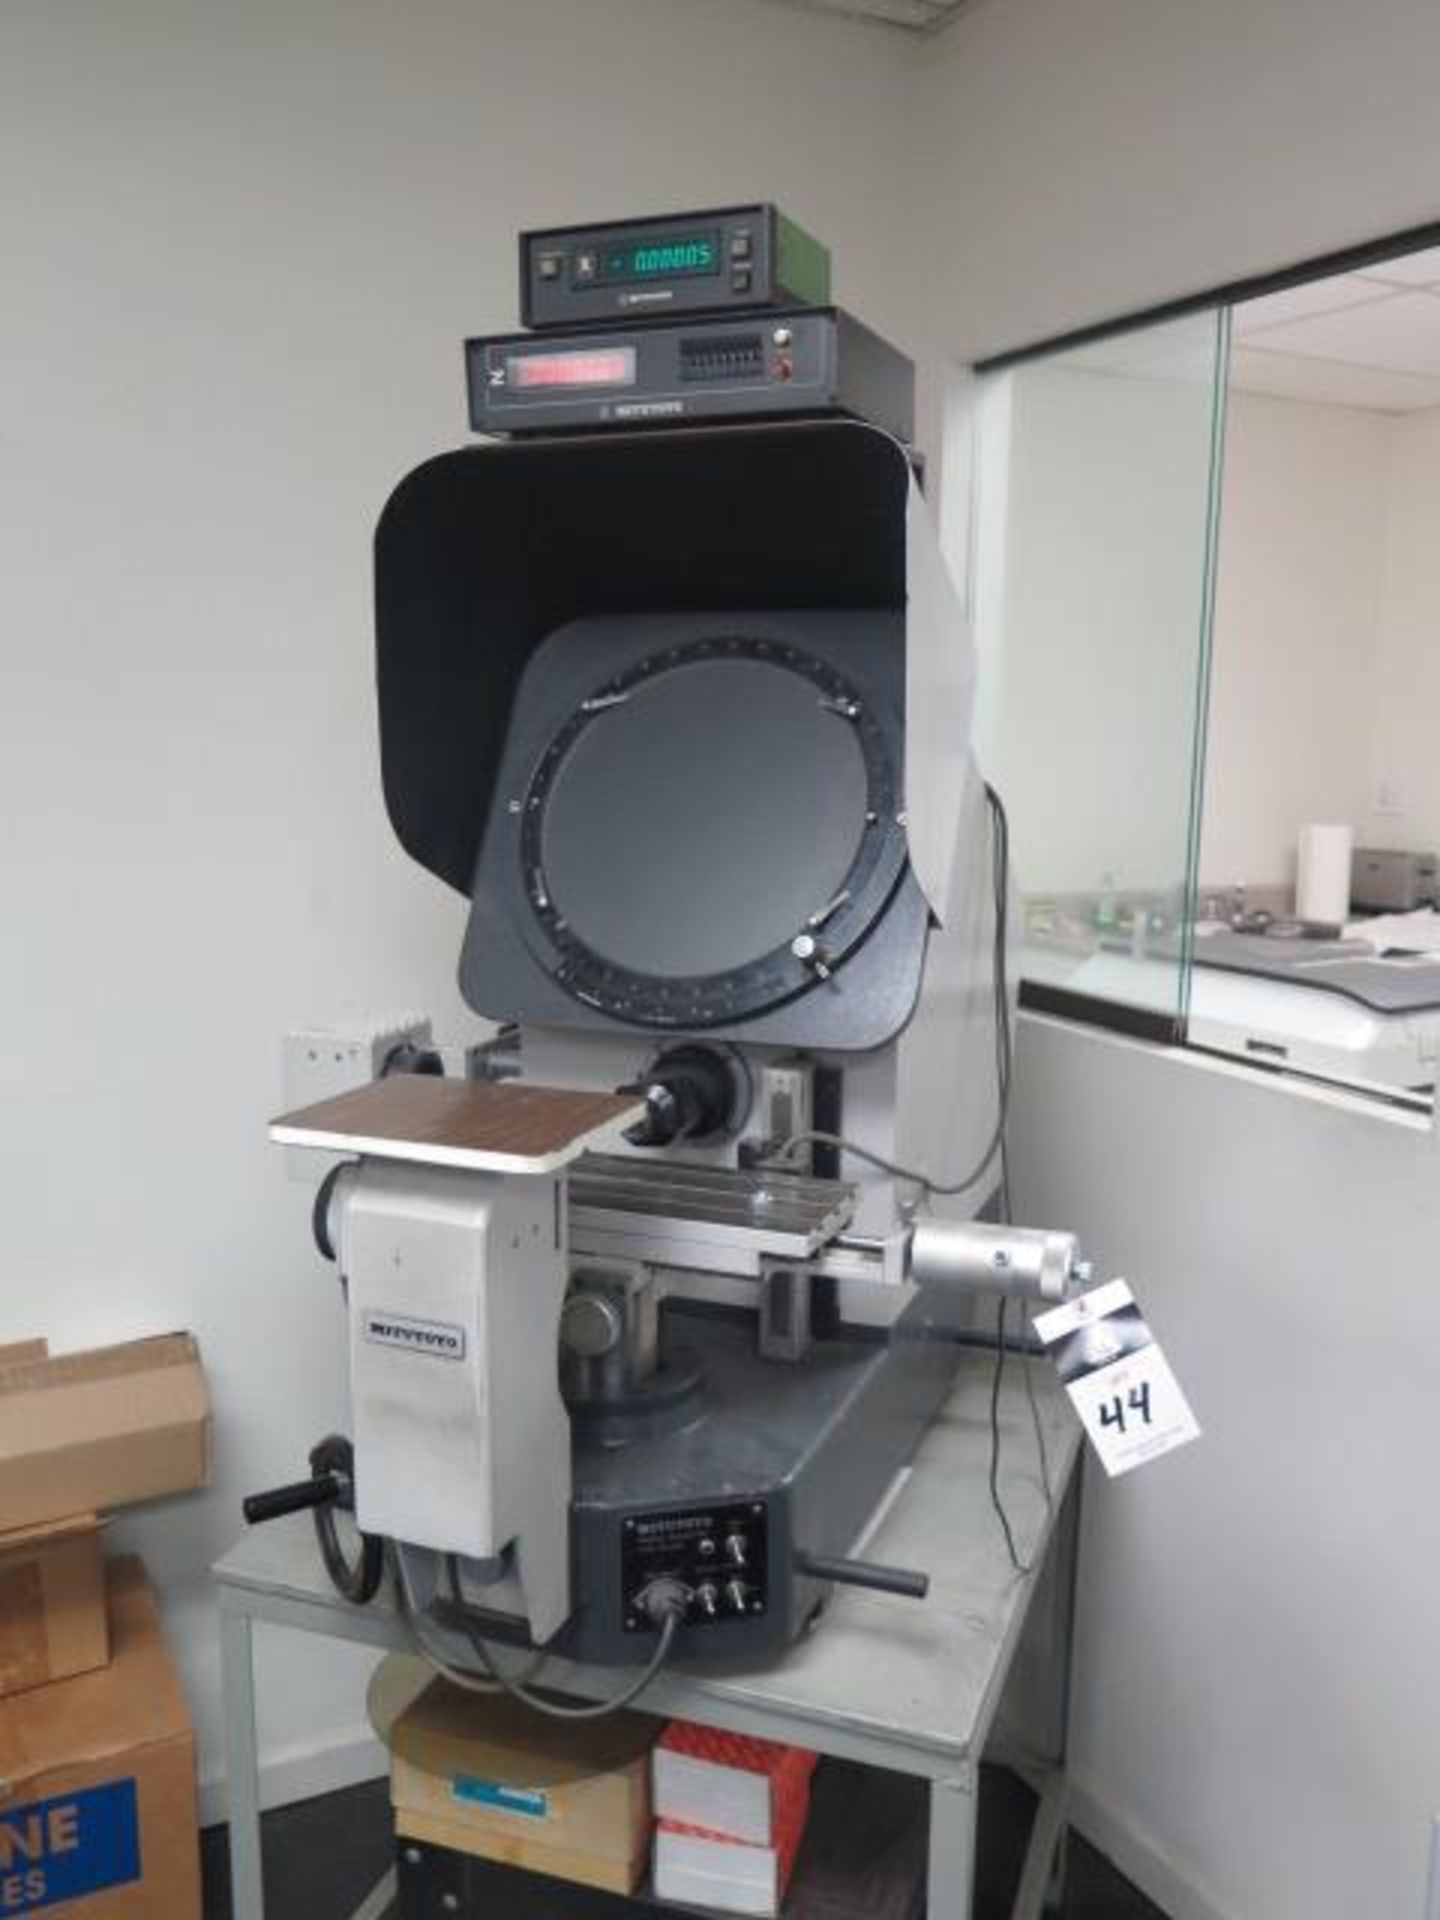 Mitutoyo PH-350 13" Optical Comparator s/n 362 w/ Mitutoyo DRO's, 20X and 50X Lenses, SOLD AS IS